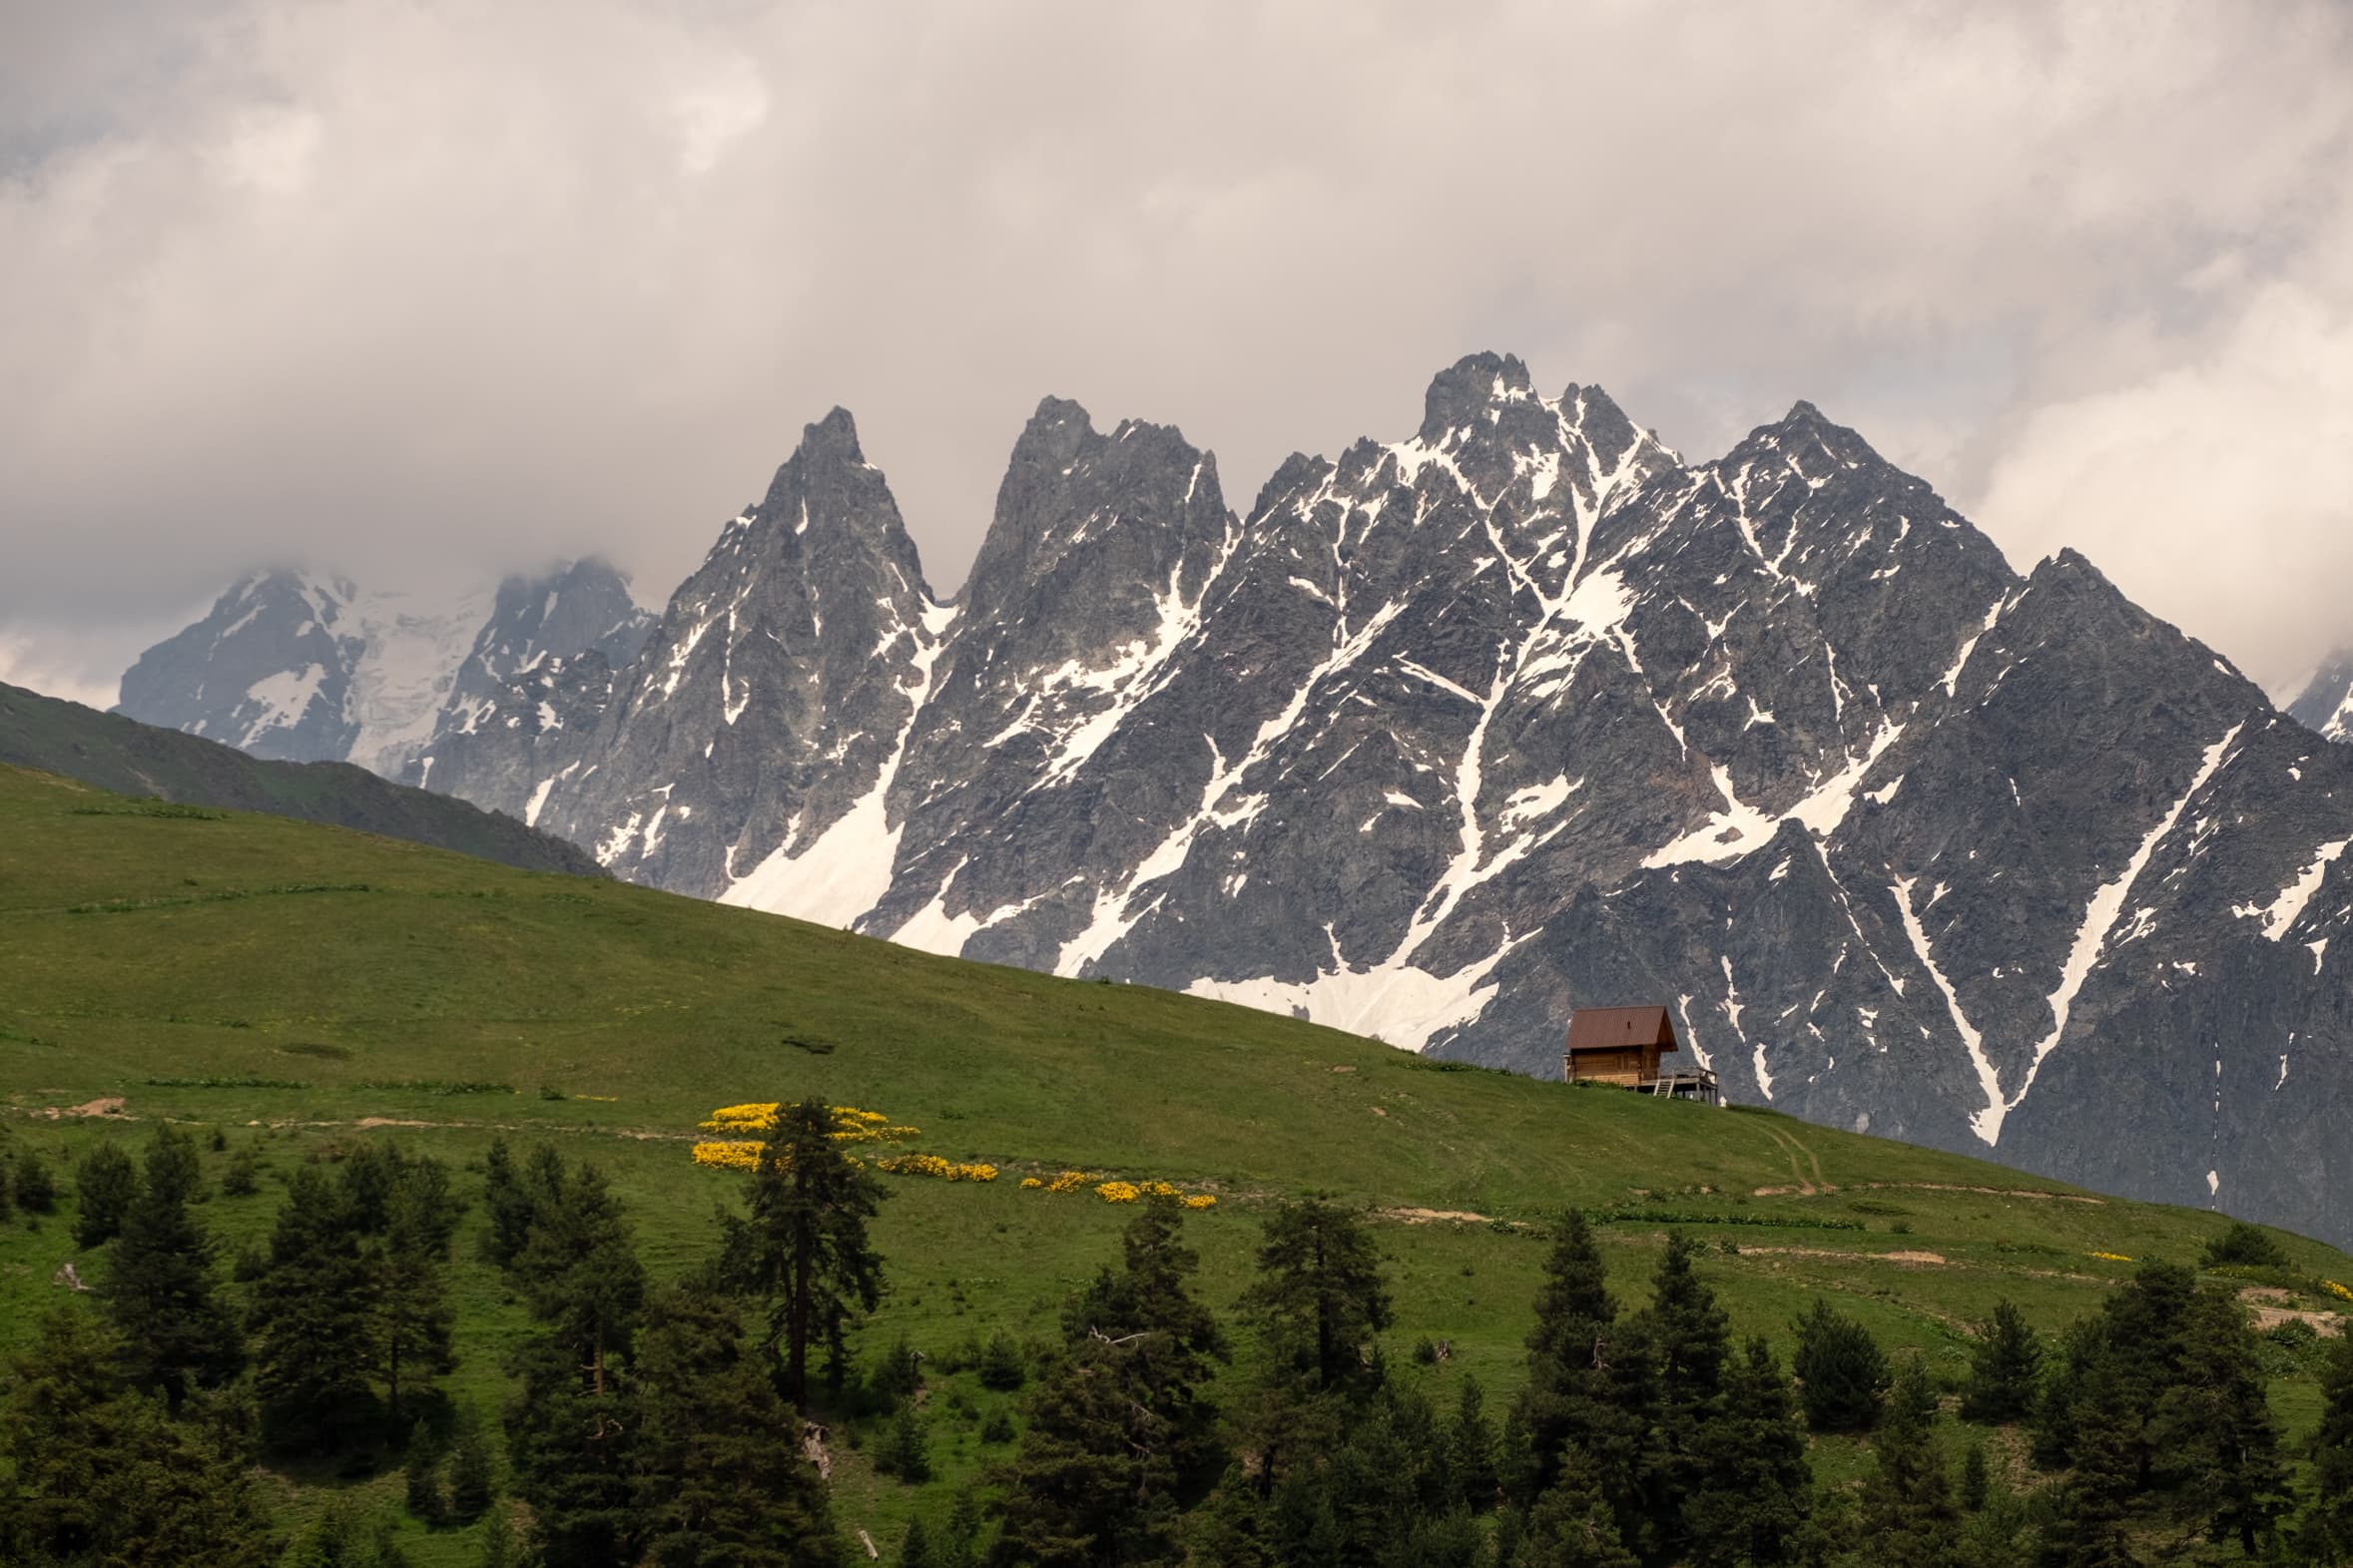 Wooden mountain hut on a green meadow with imposing steep jagged mountains behind